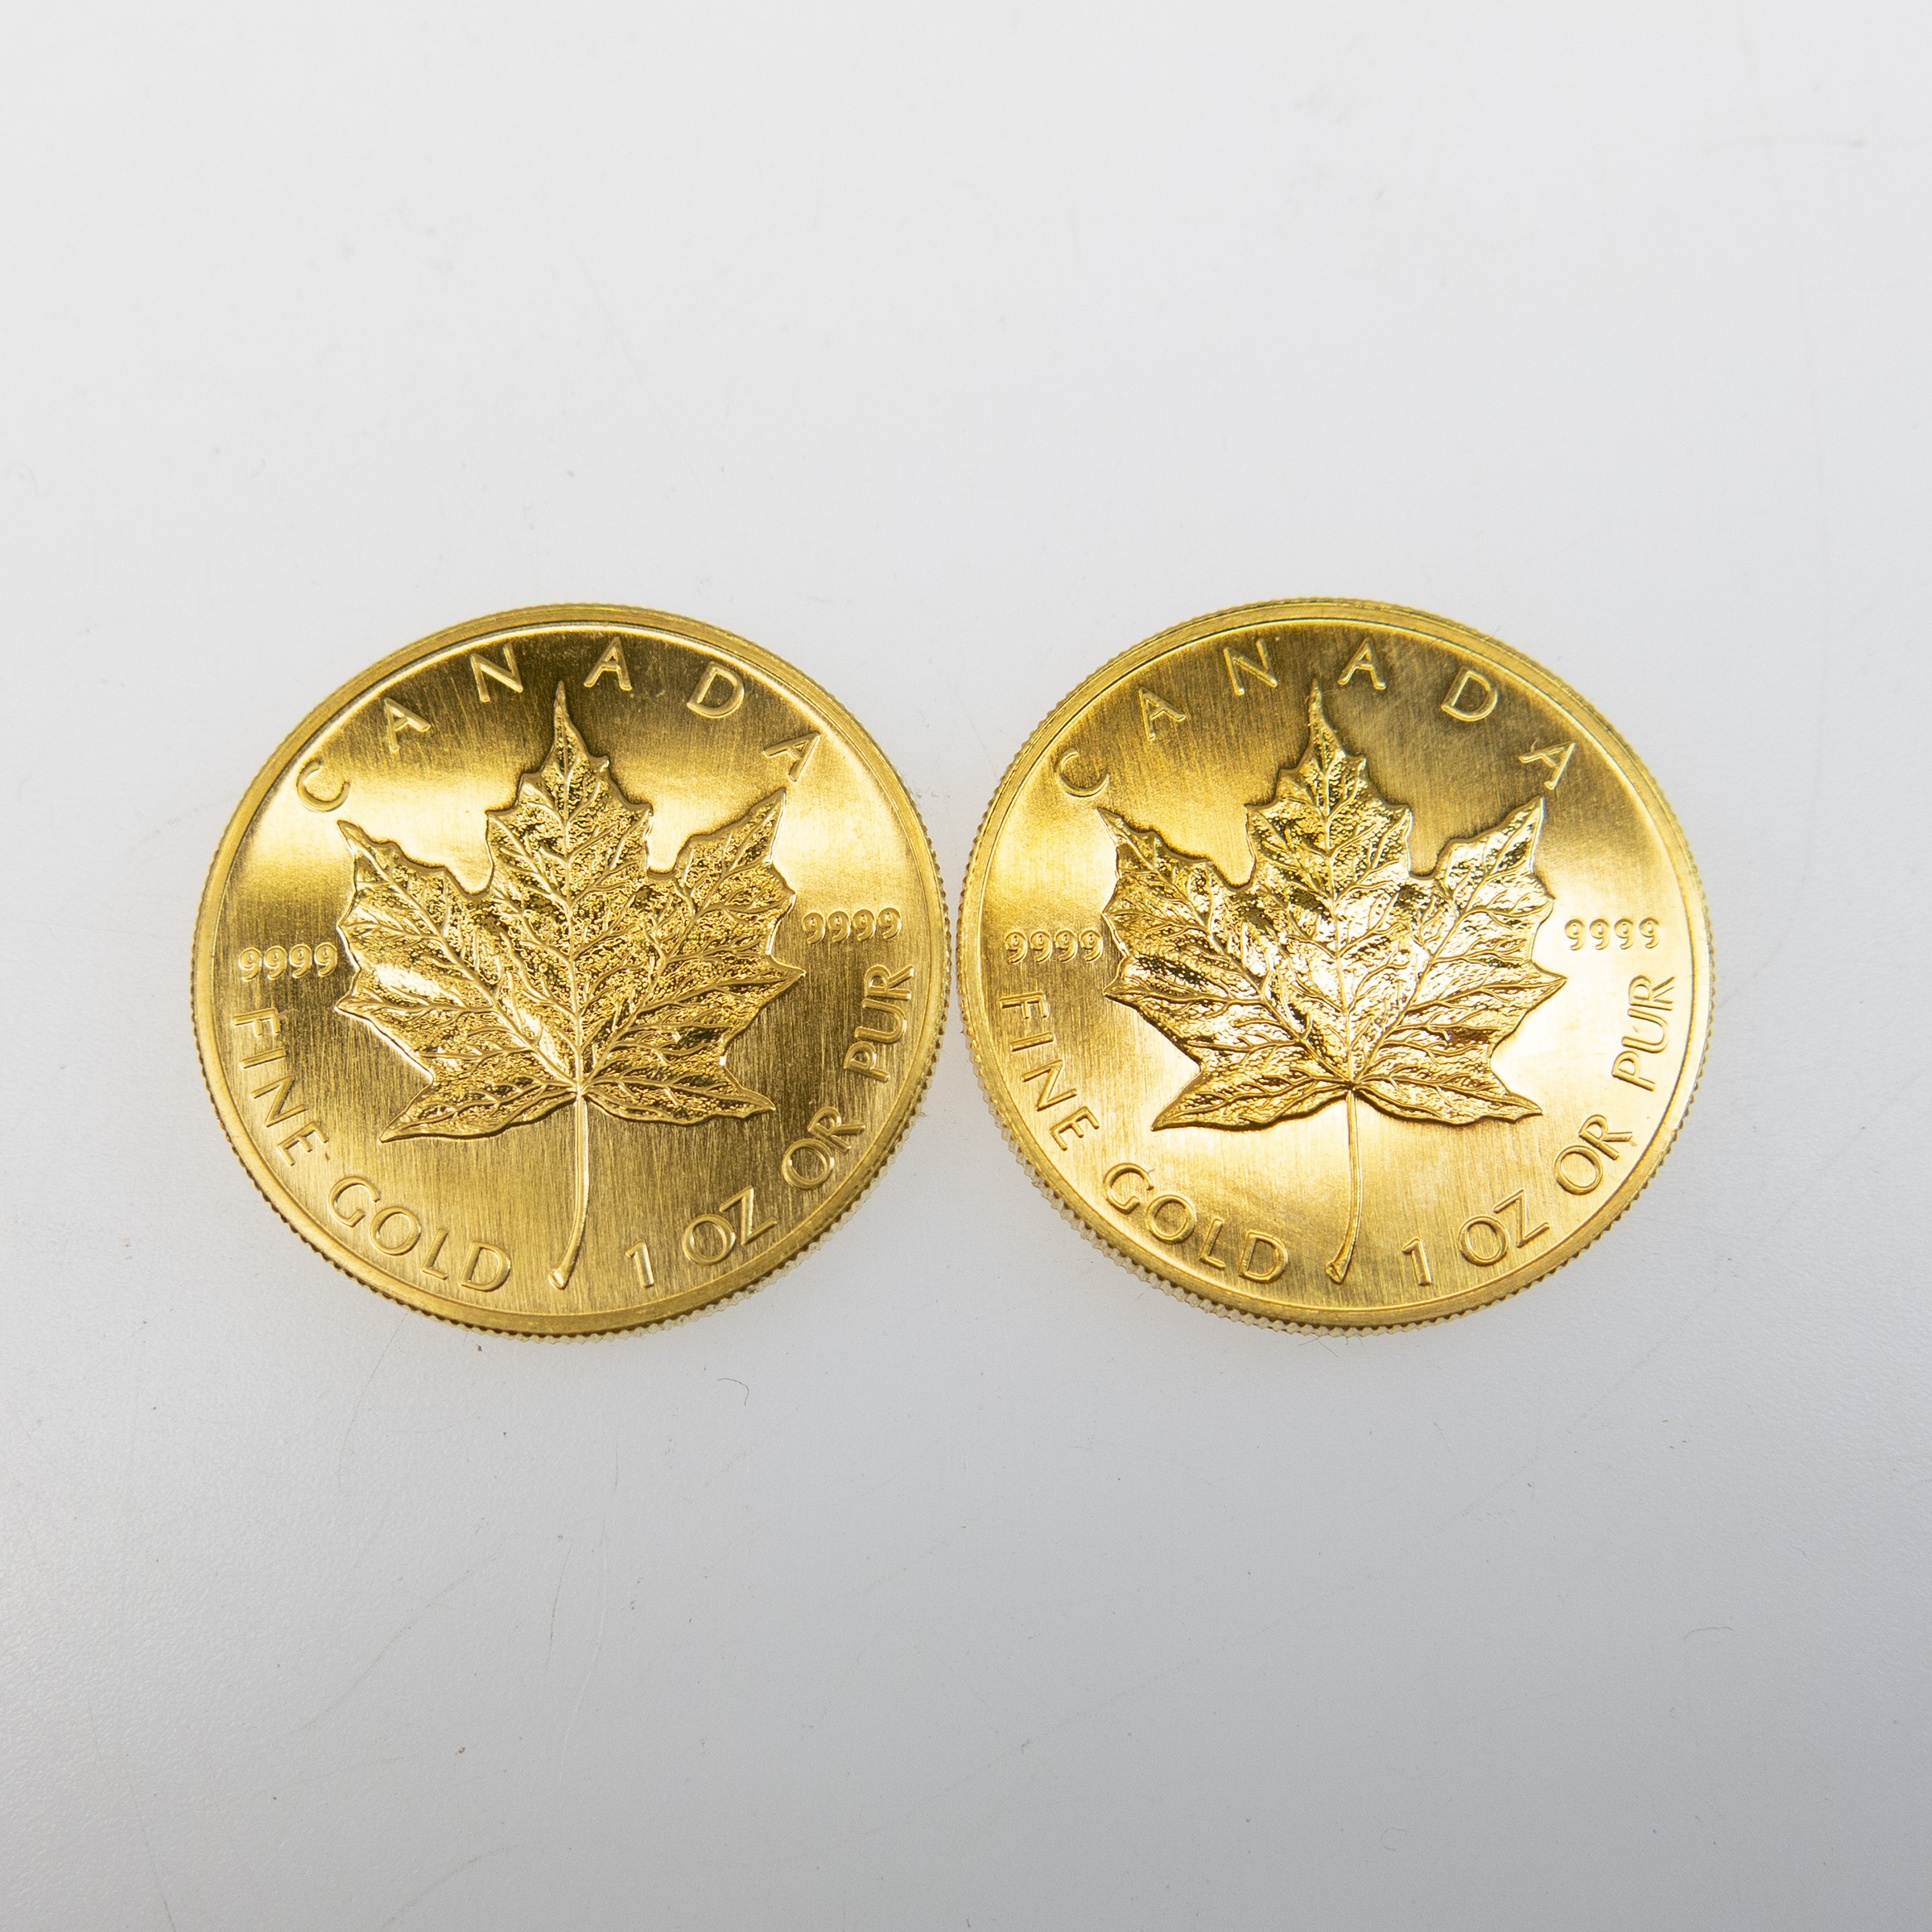 Two Canadian One Ounce Gold Maple Leaf Coins